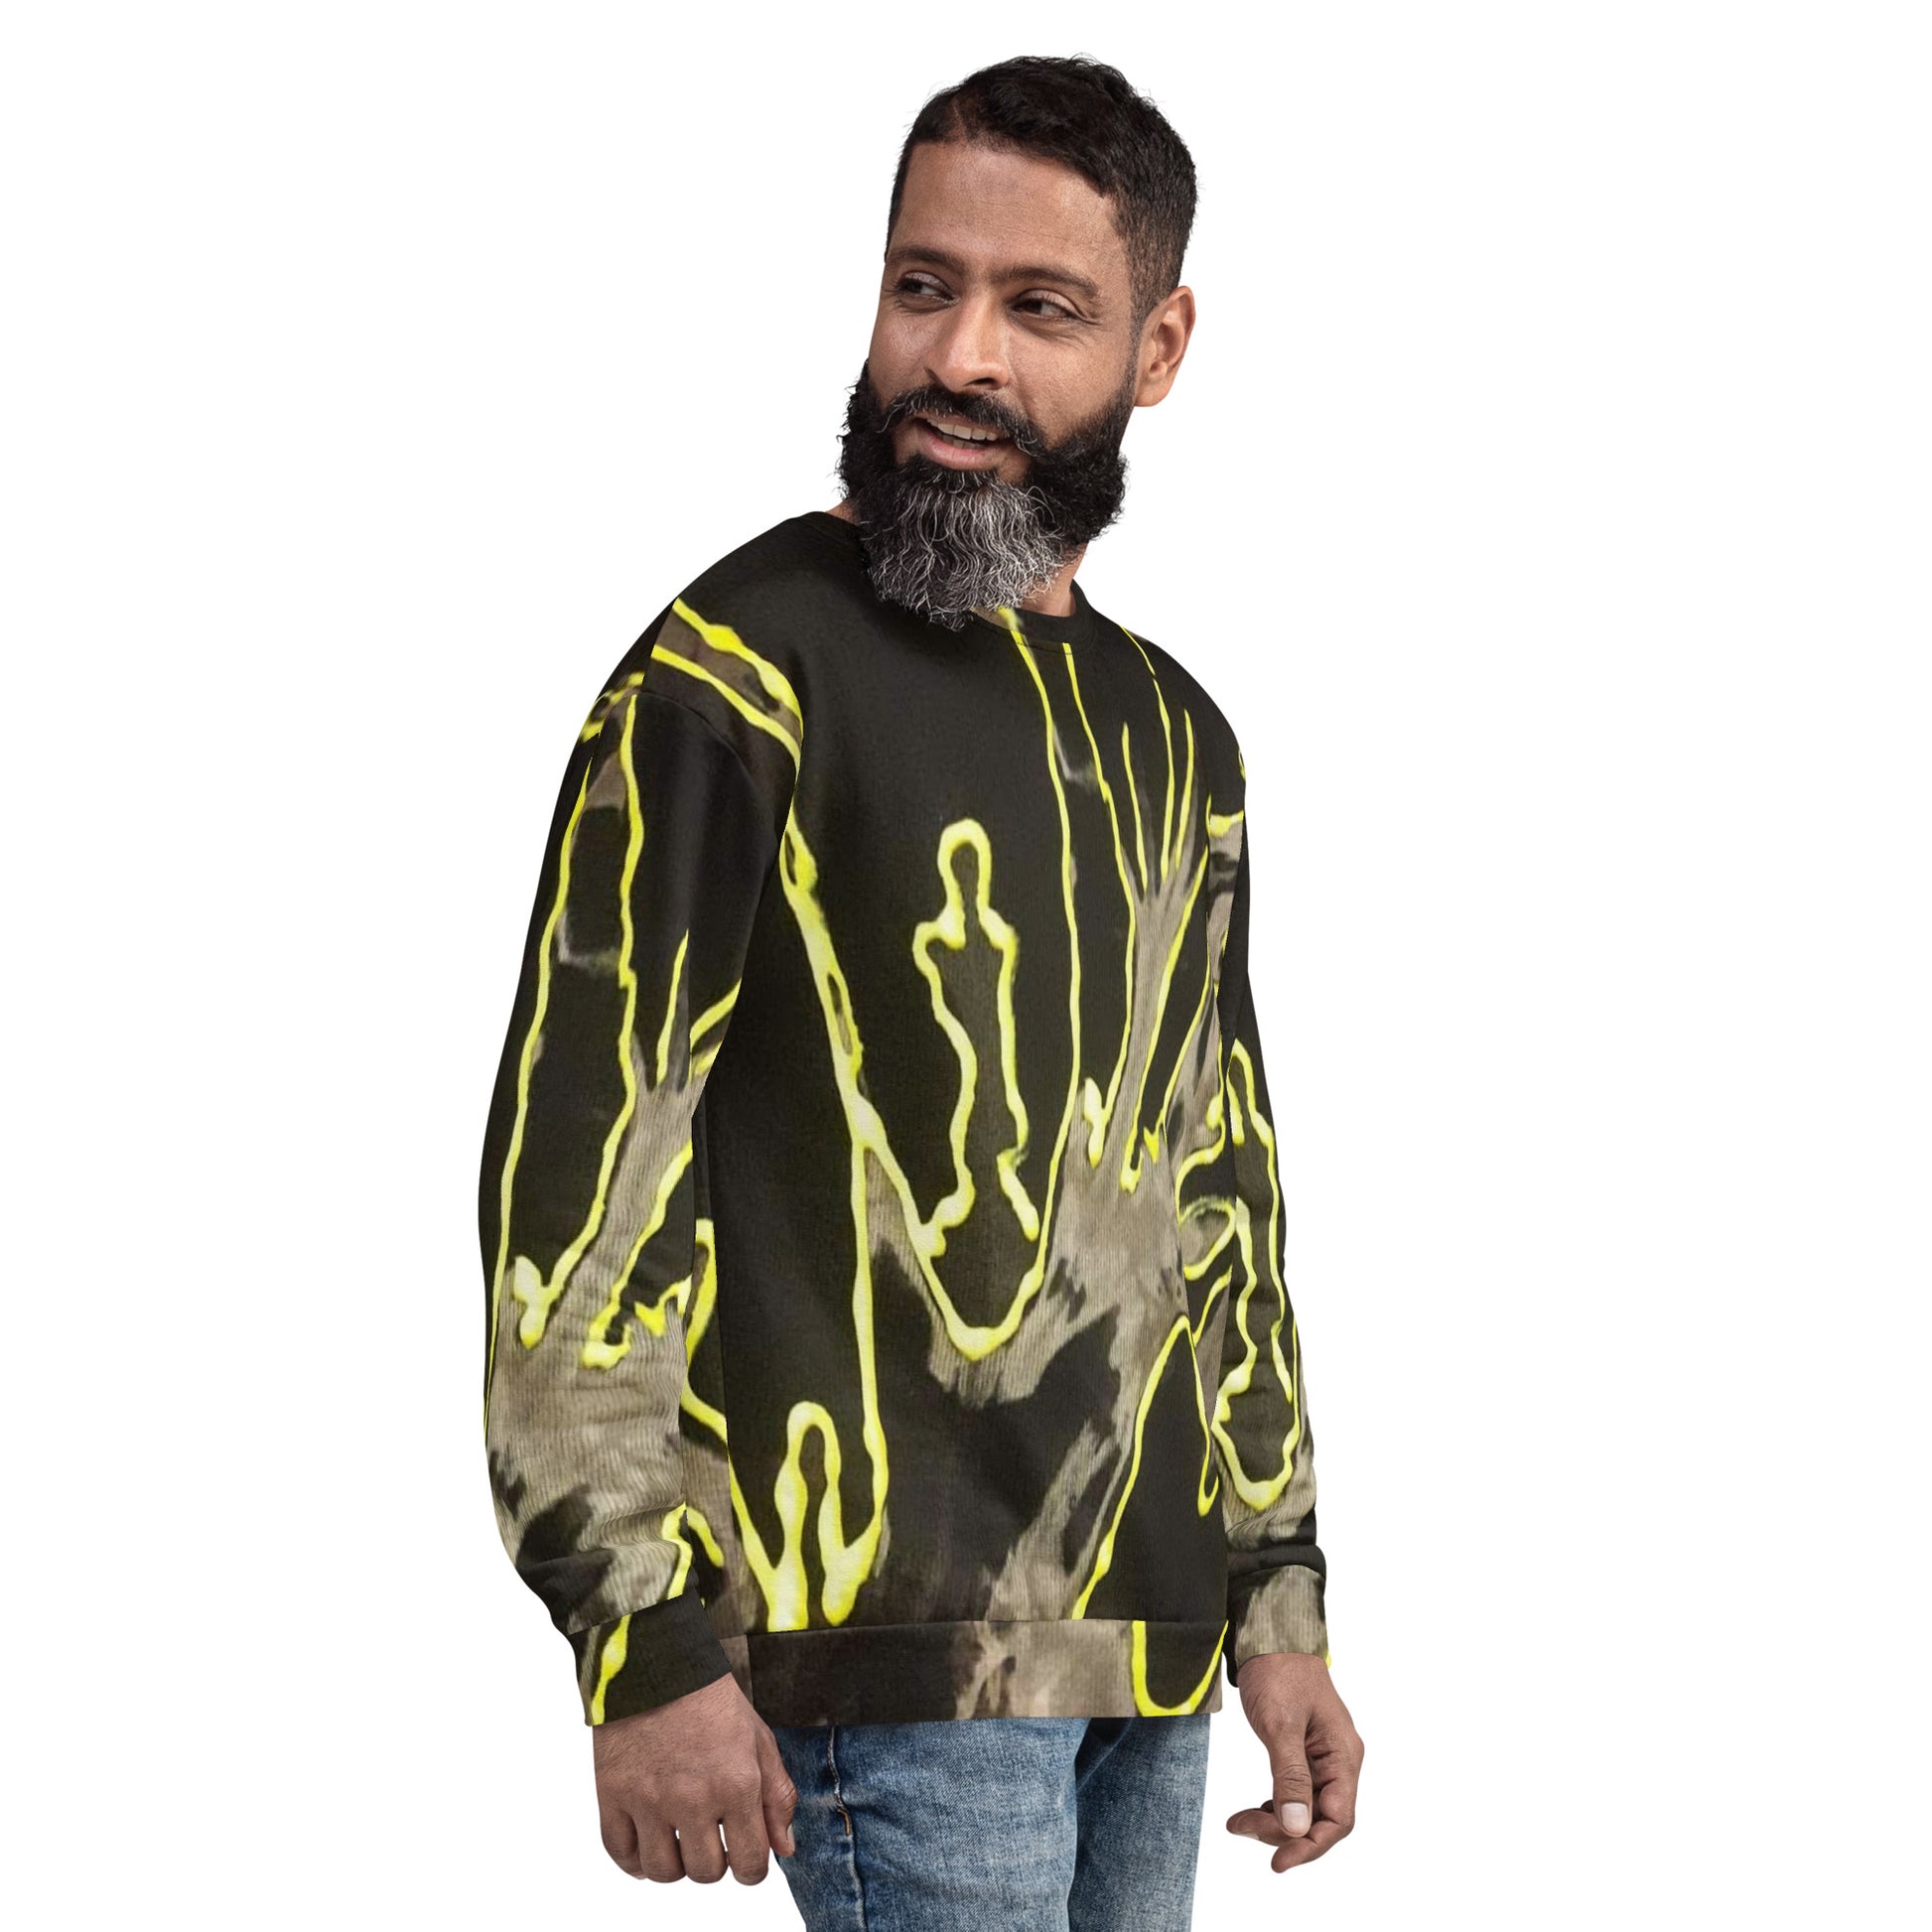 Abstract Unisex Sweatshirt - O By Onica Online Store